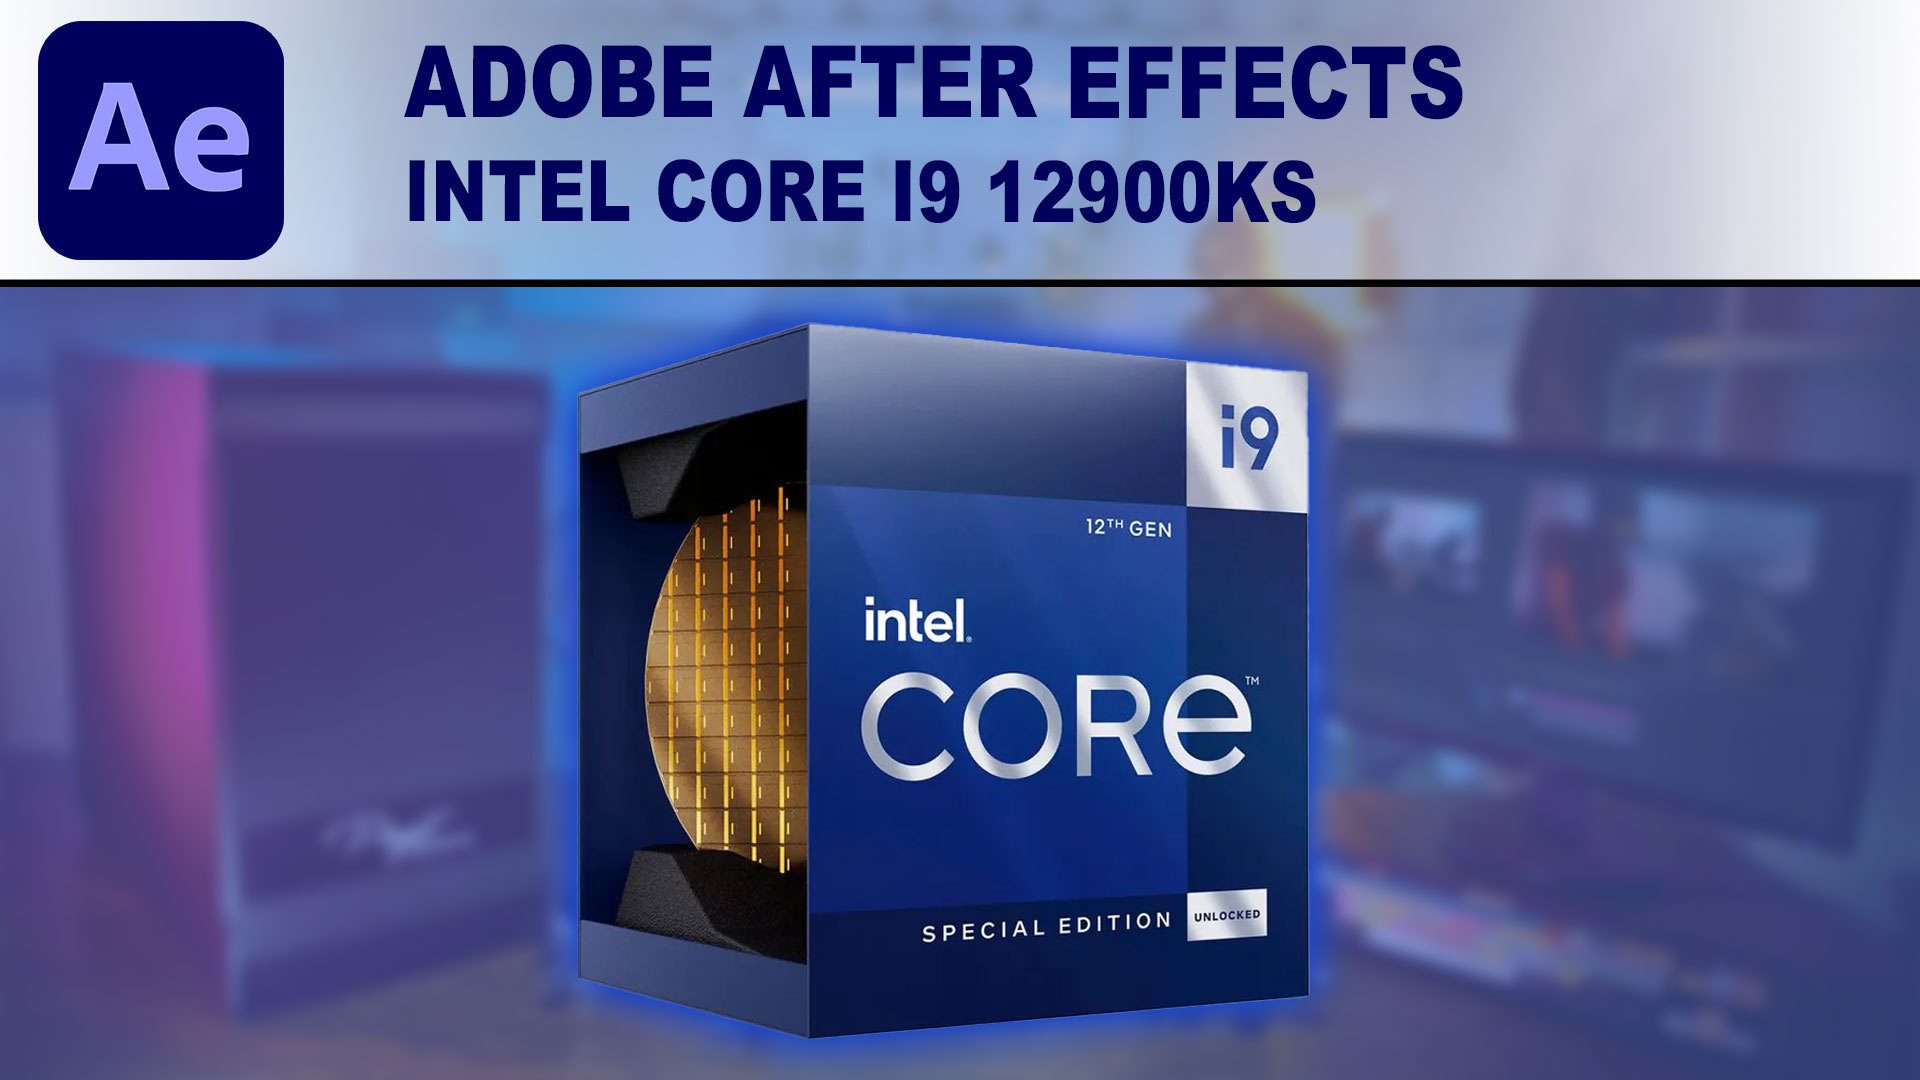 Intel Core i9 12900KS for Adobe After Effects